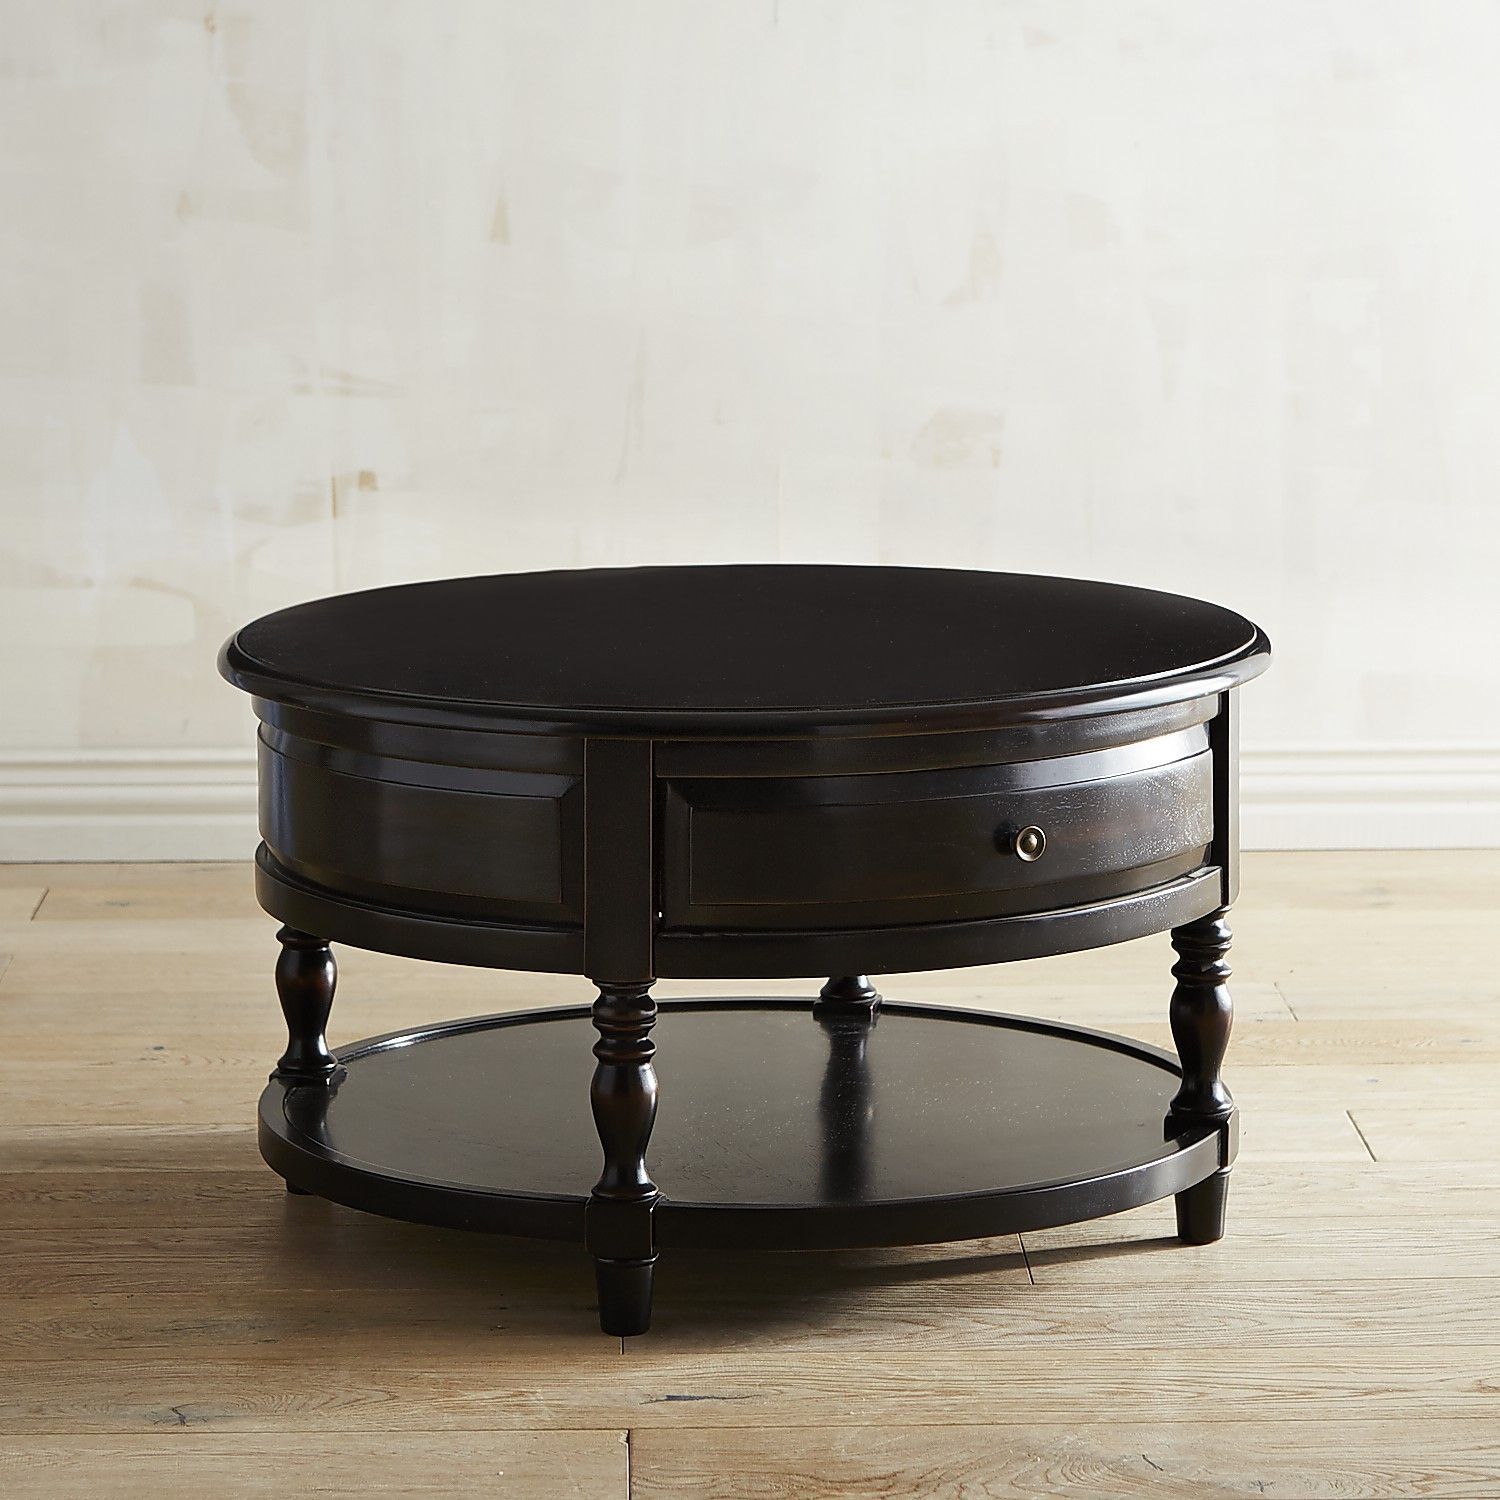 Anywhere Rubbed Black Round Coffee Table | Round Coffee Table, Round Throughout Full Black Round Coffee Tables (View 20 of 20)